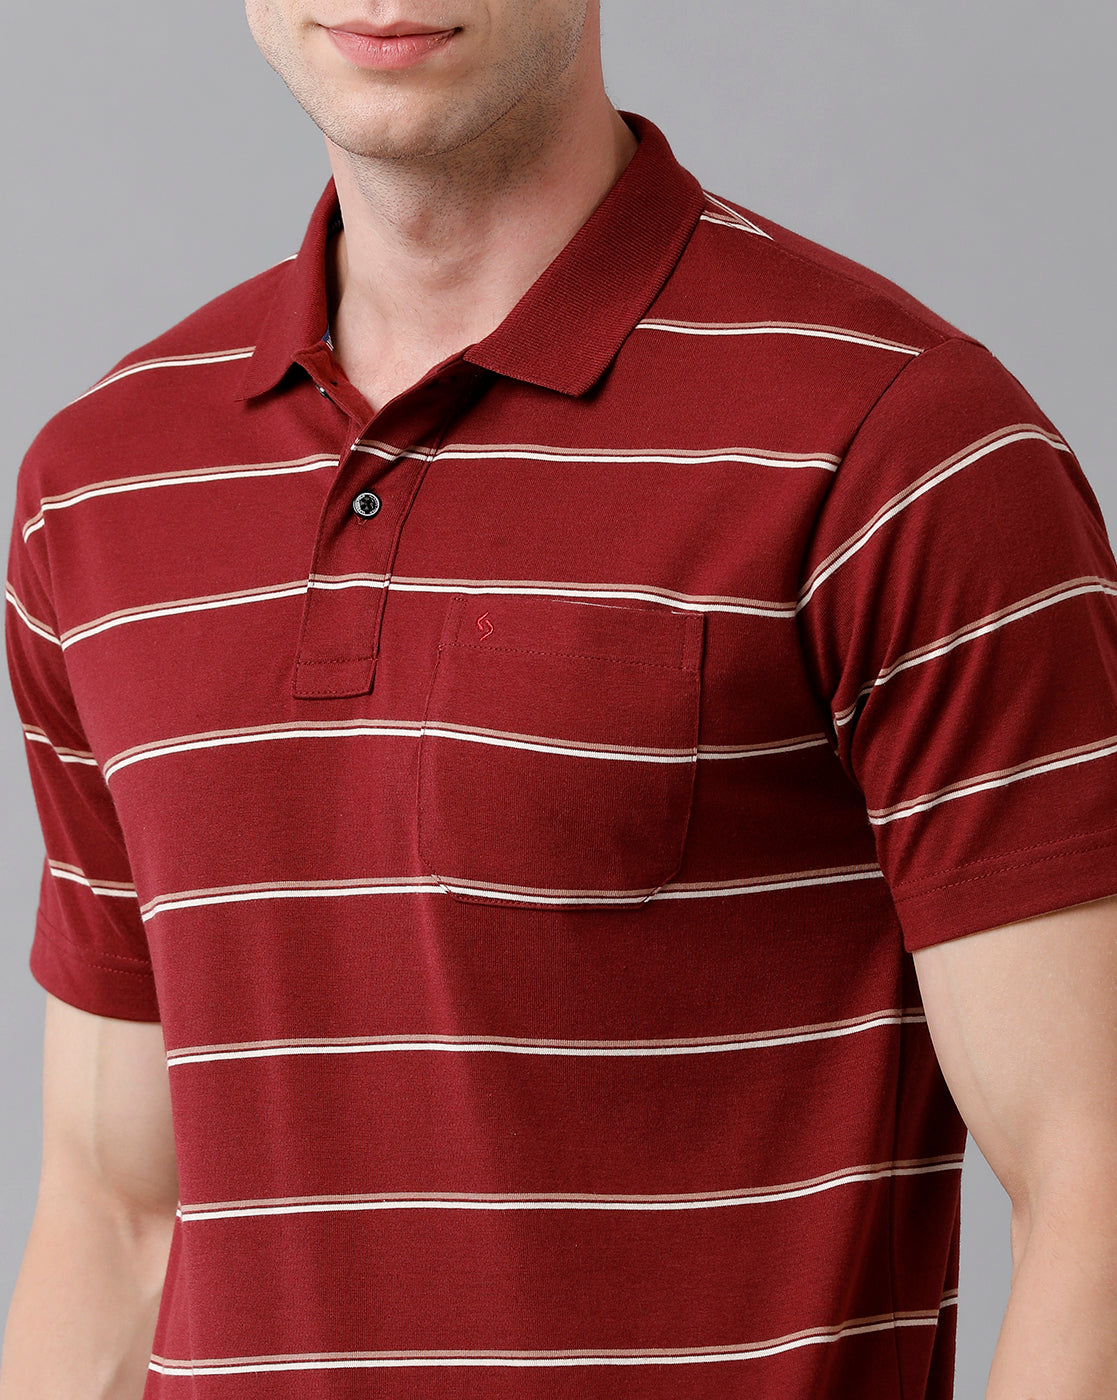 Classic Polo Men's Cotton Blend Striped Half Sleeve Regular Fit Polo Neck Red Color T-Shirt | Avon - 494 A